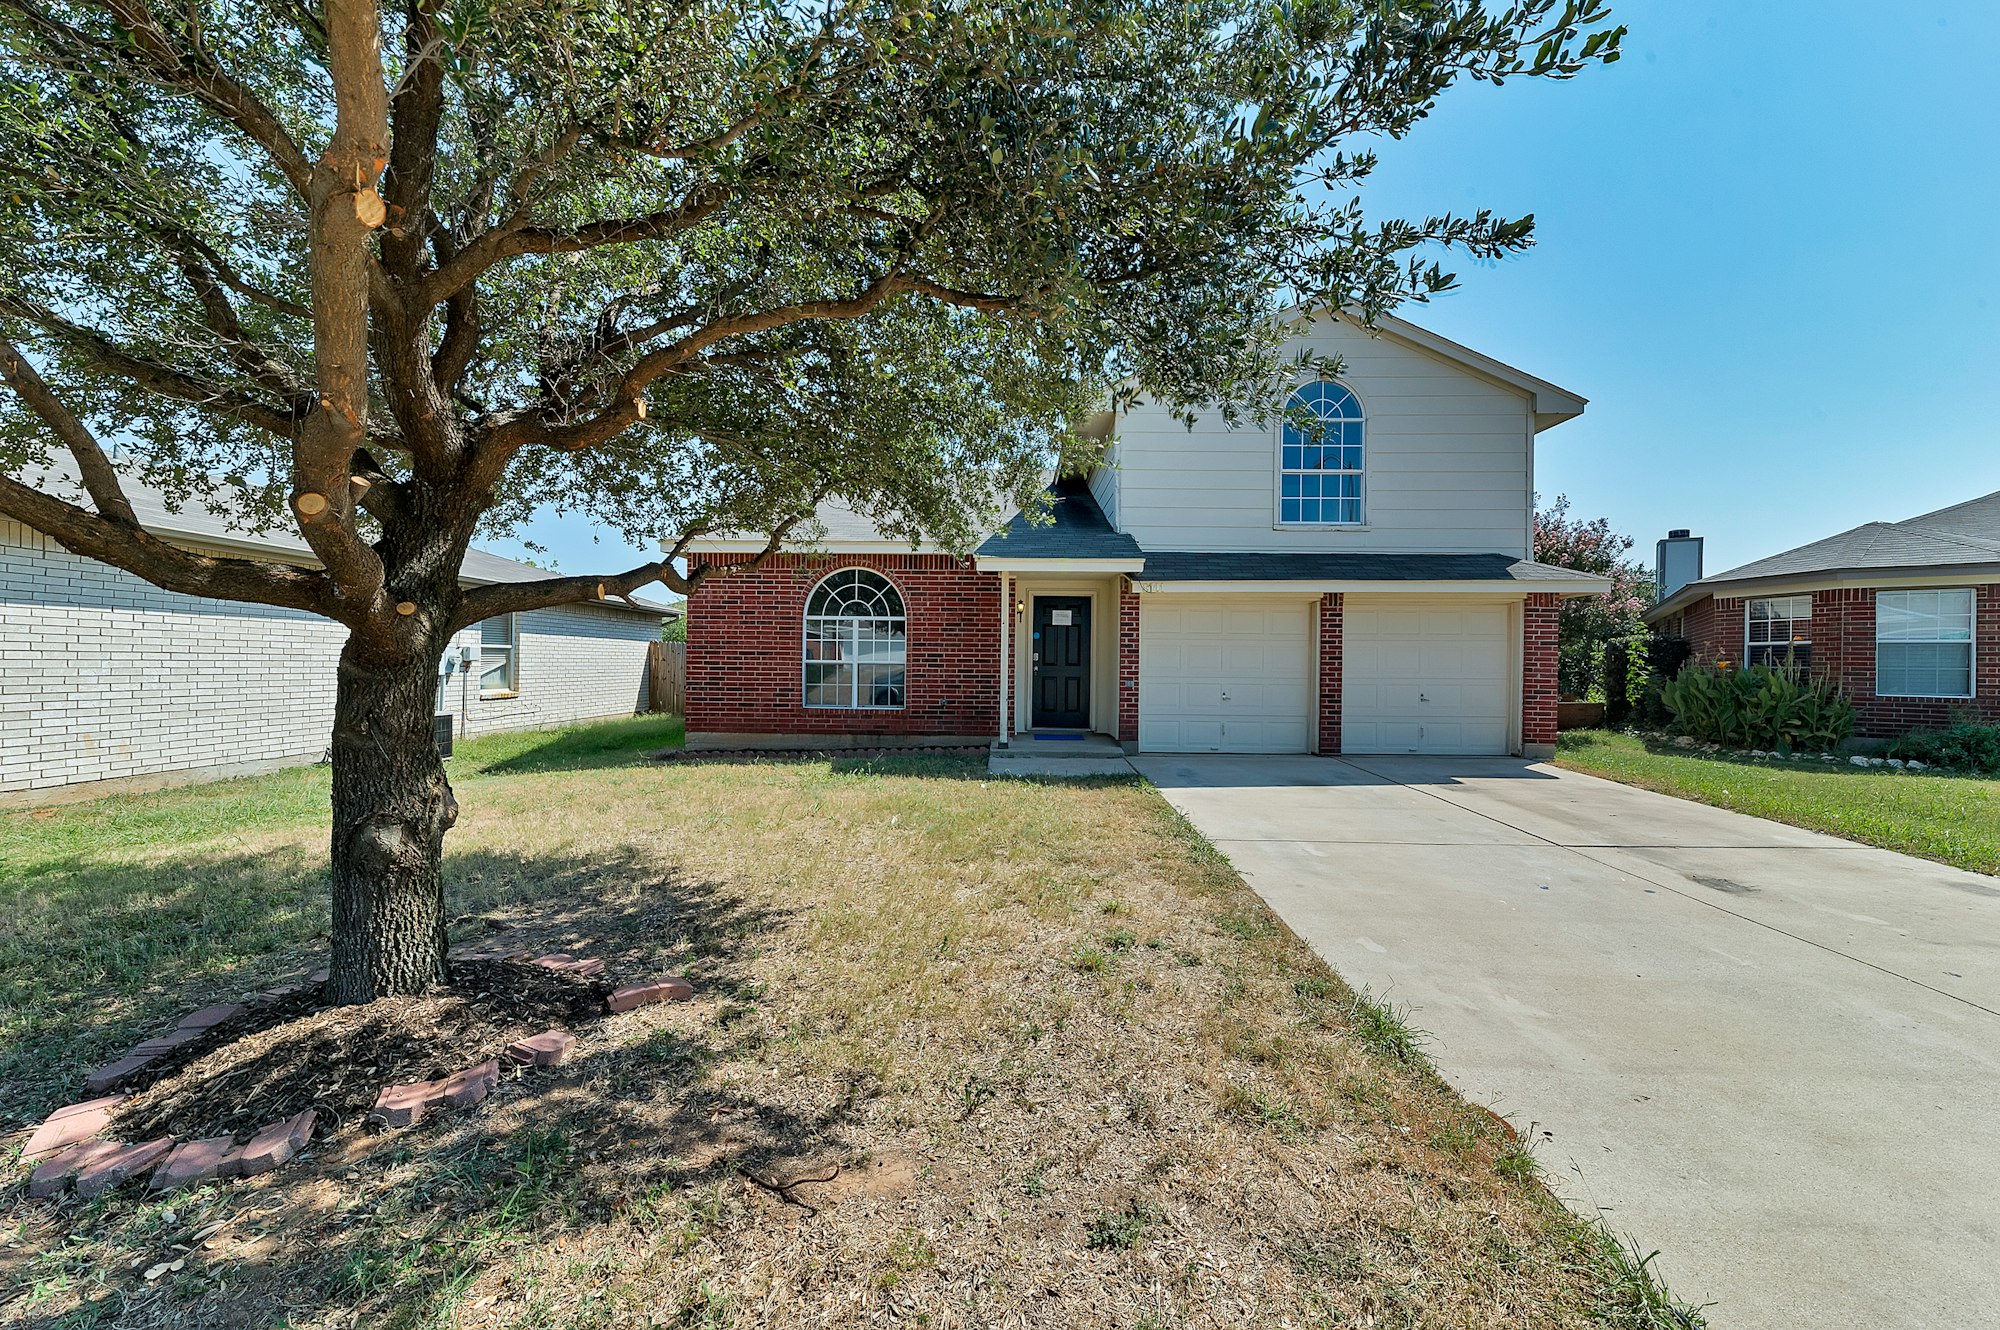 Photo 1 of 28 - 8141 Dripping Springs Dr, Fort Worth, TX 76134